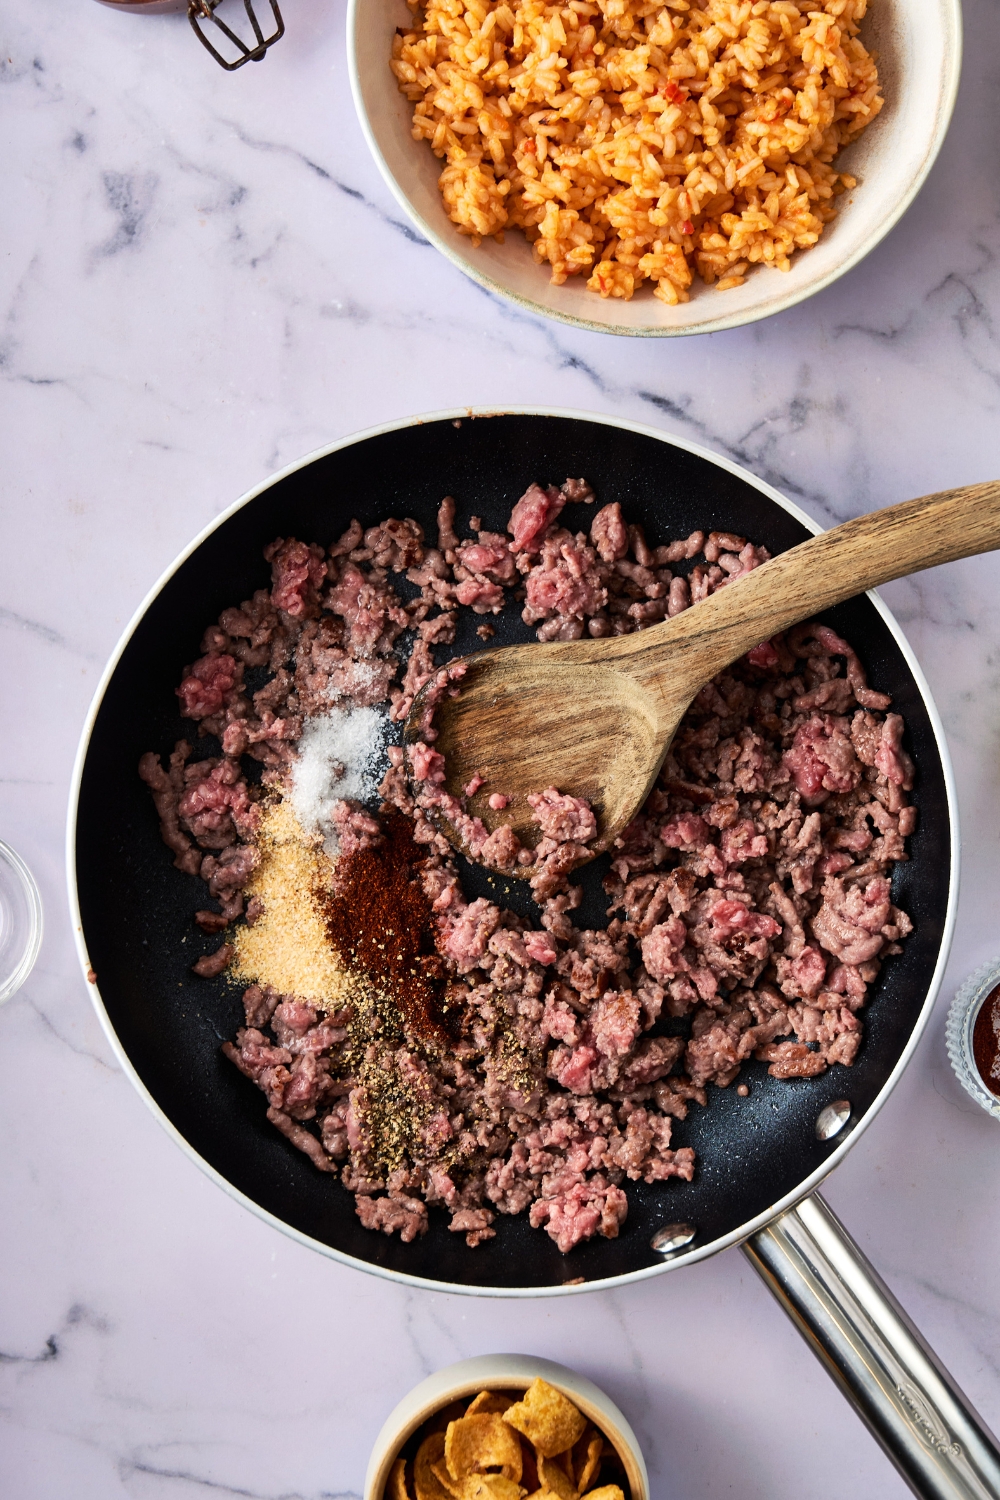 A pan holds ground beef and seasonings. A wooden spoon rests in the pan.